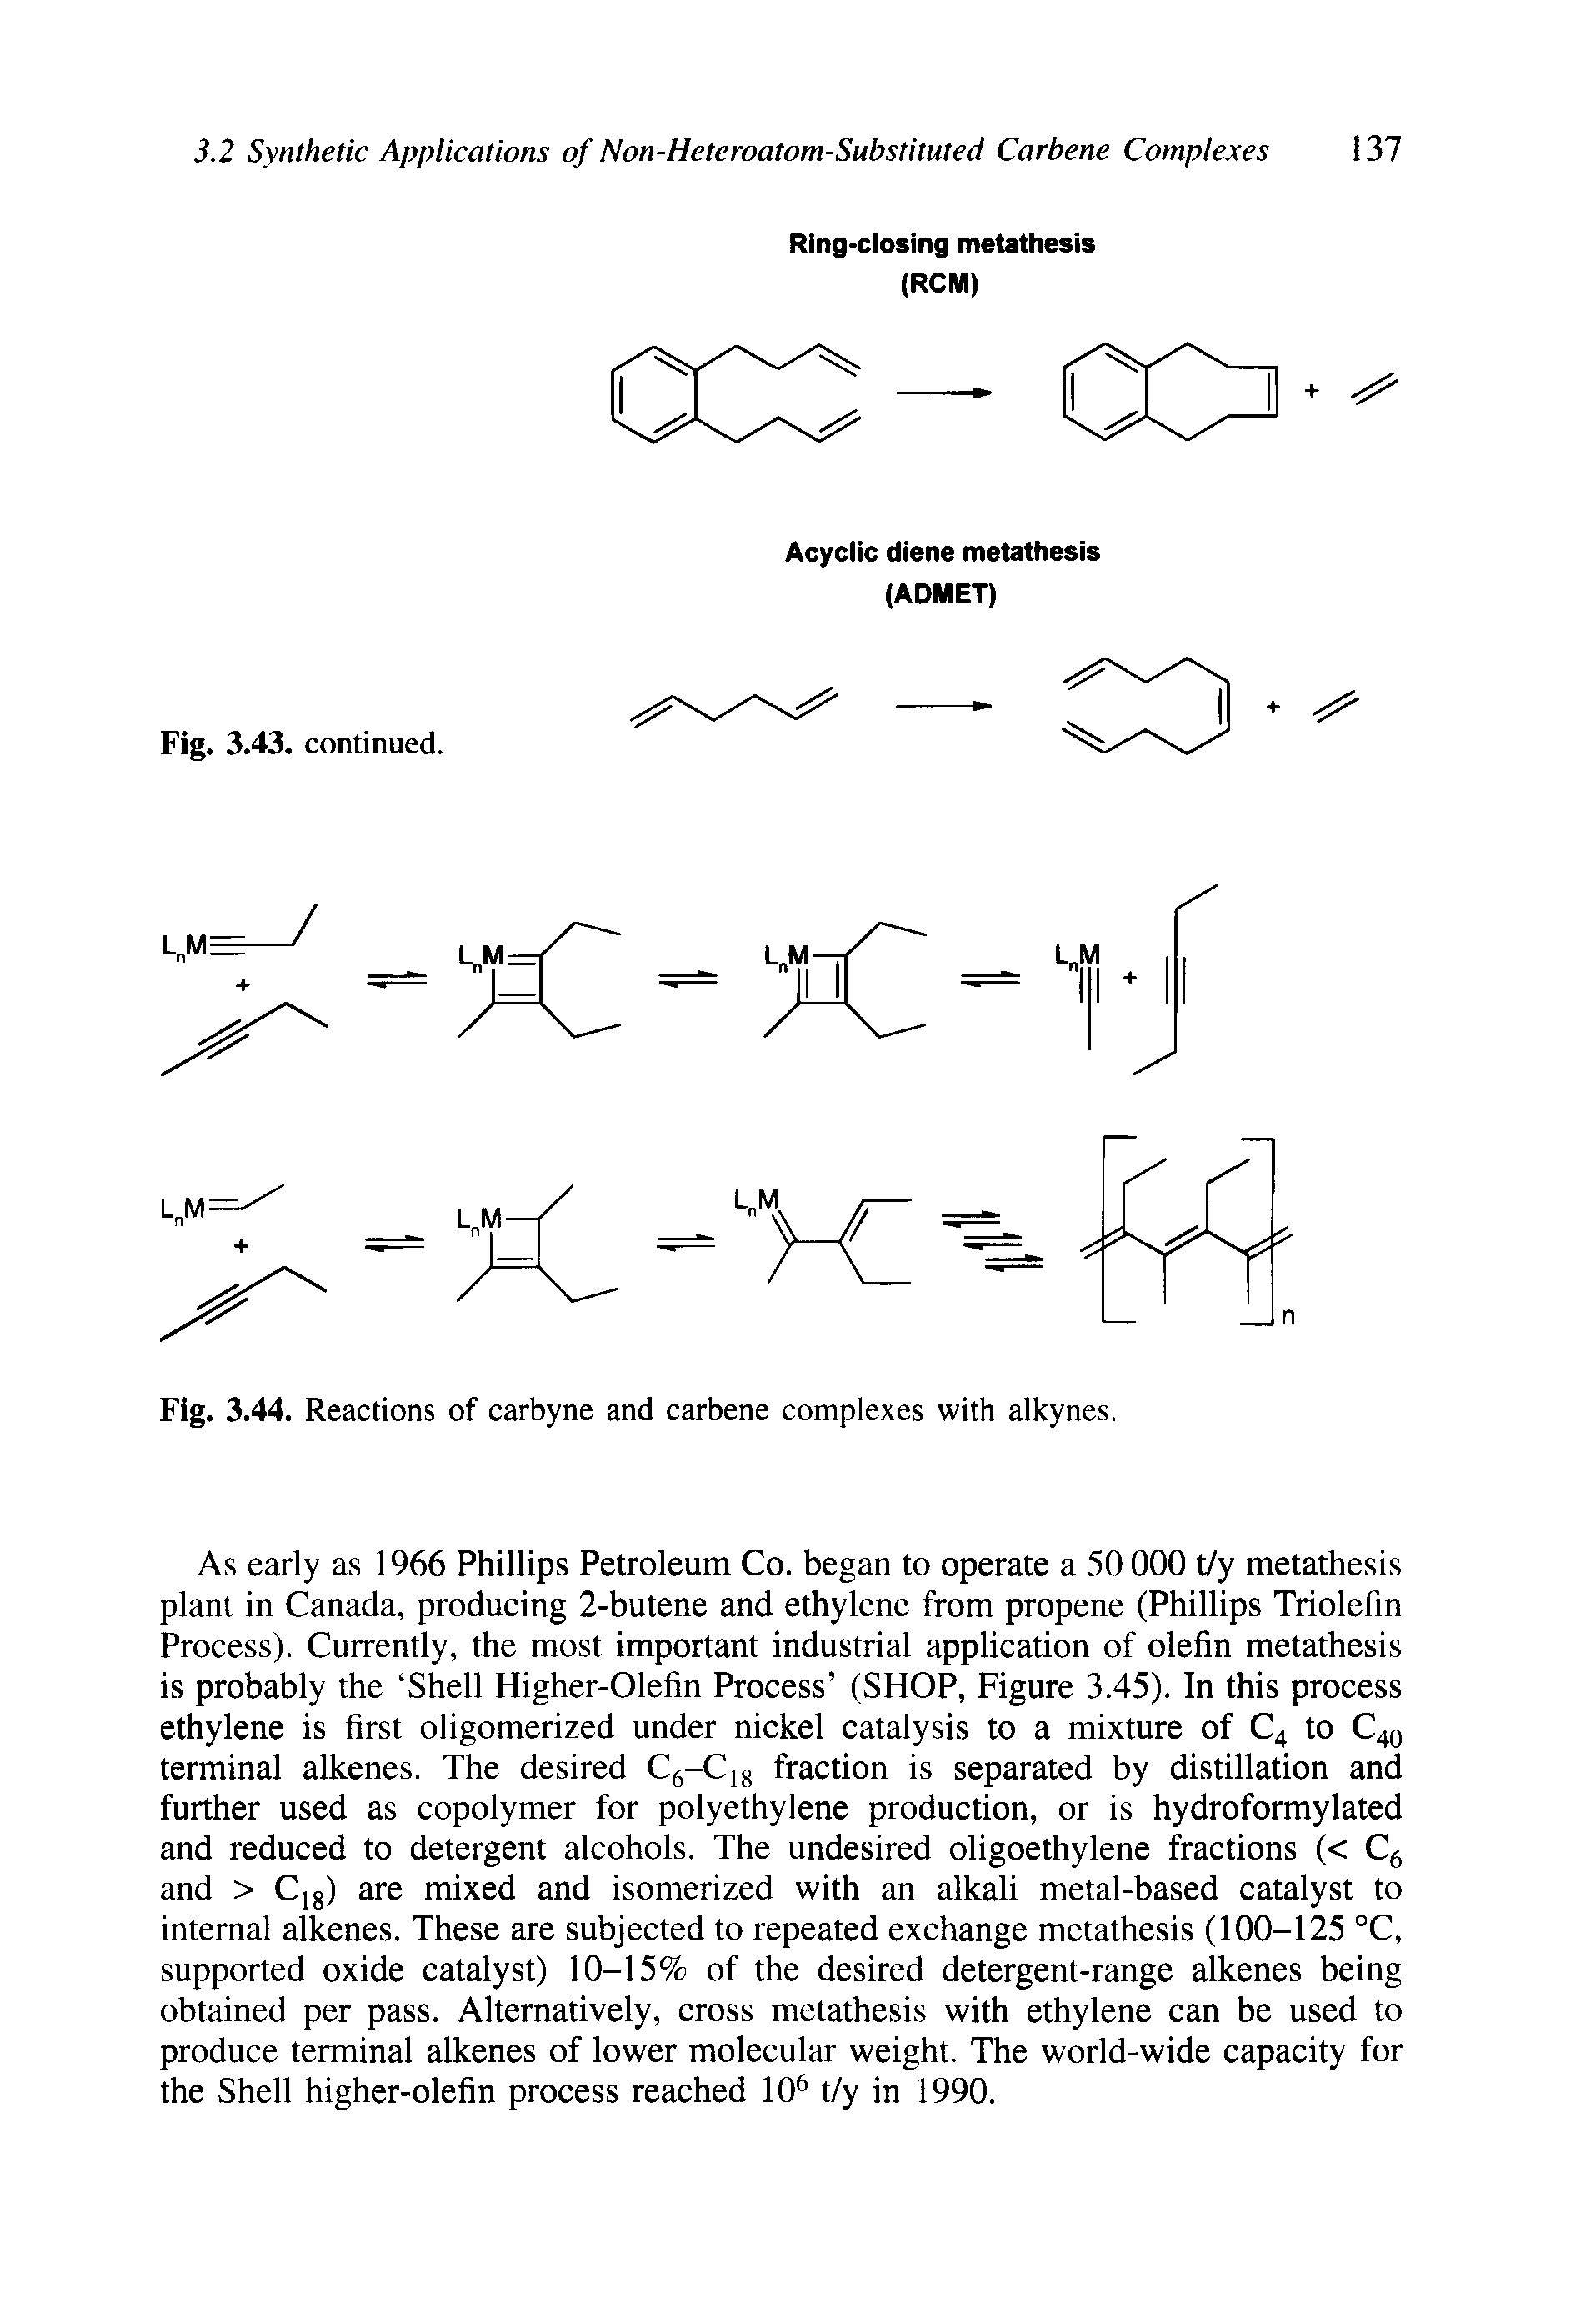 Fig. 3.44. Reactions of carbyne and carbene complexes with alkynes.